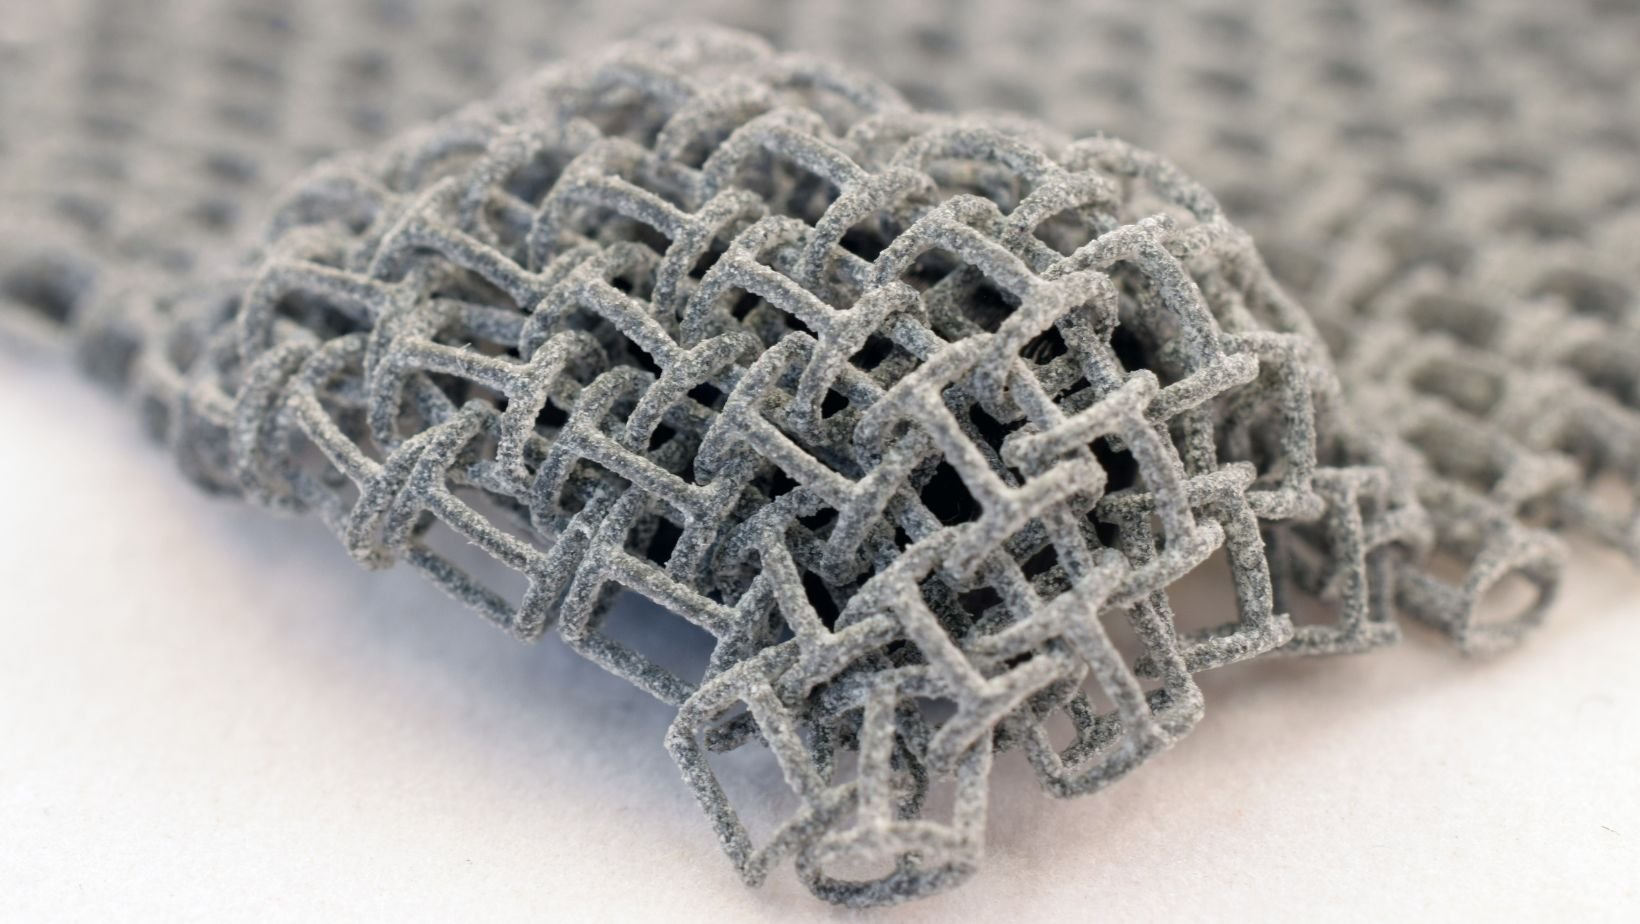 interlocking 'chainmail' design produced by additive manufacturing